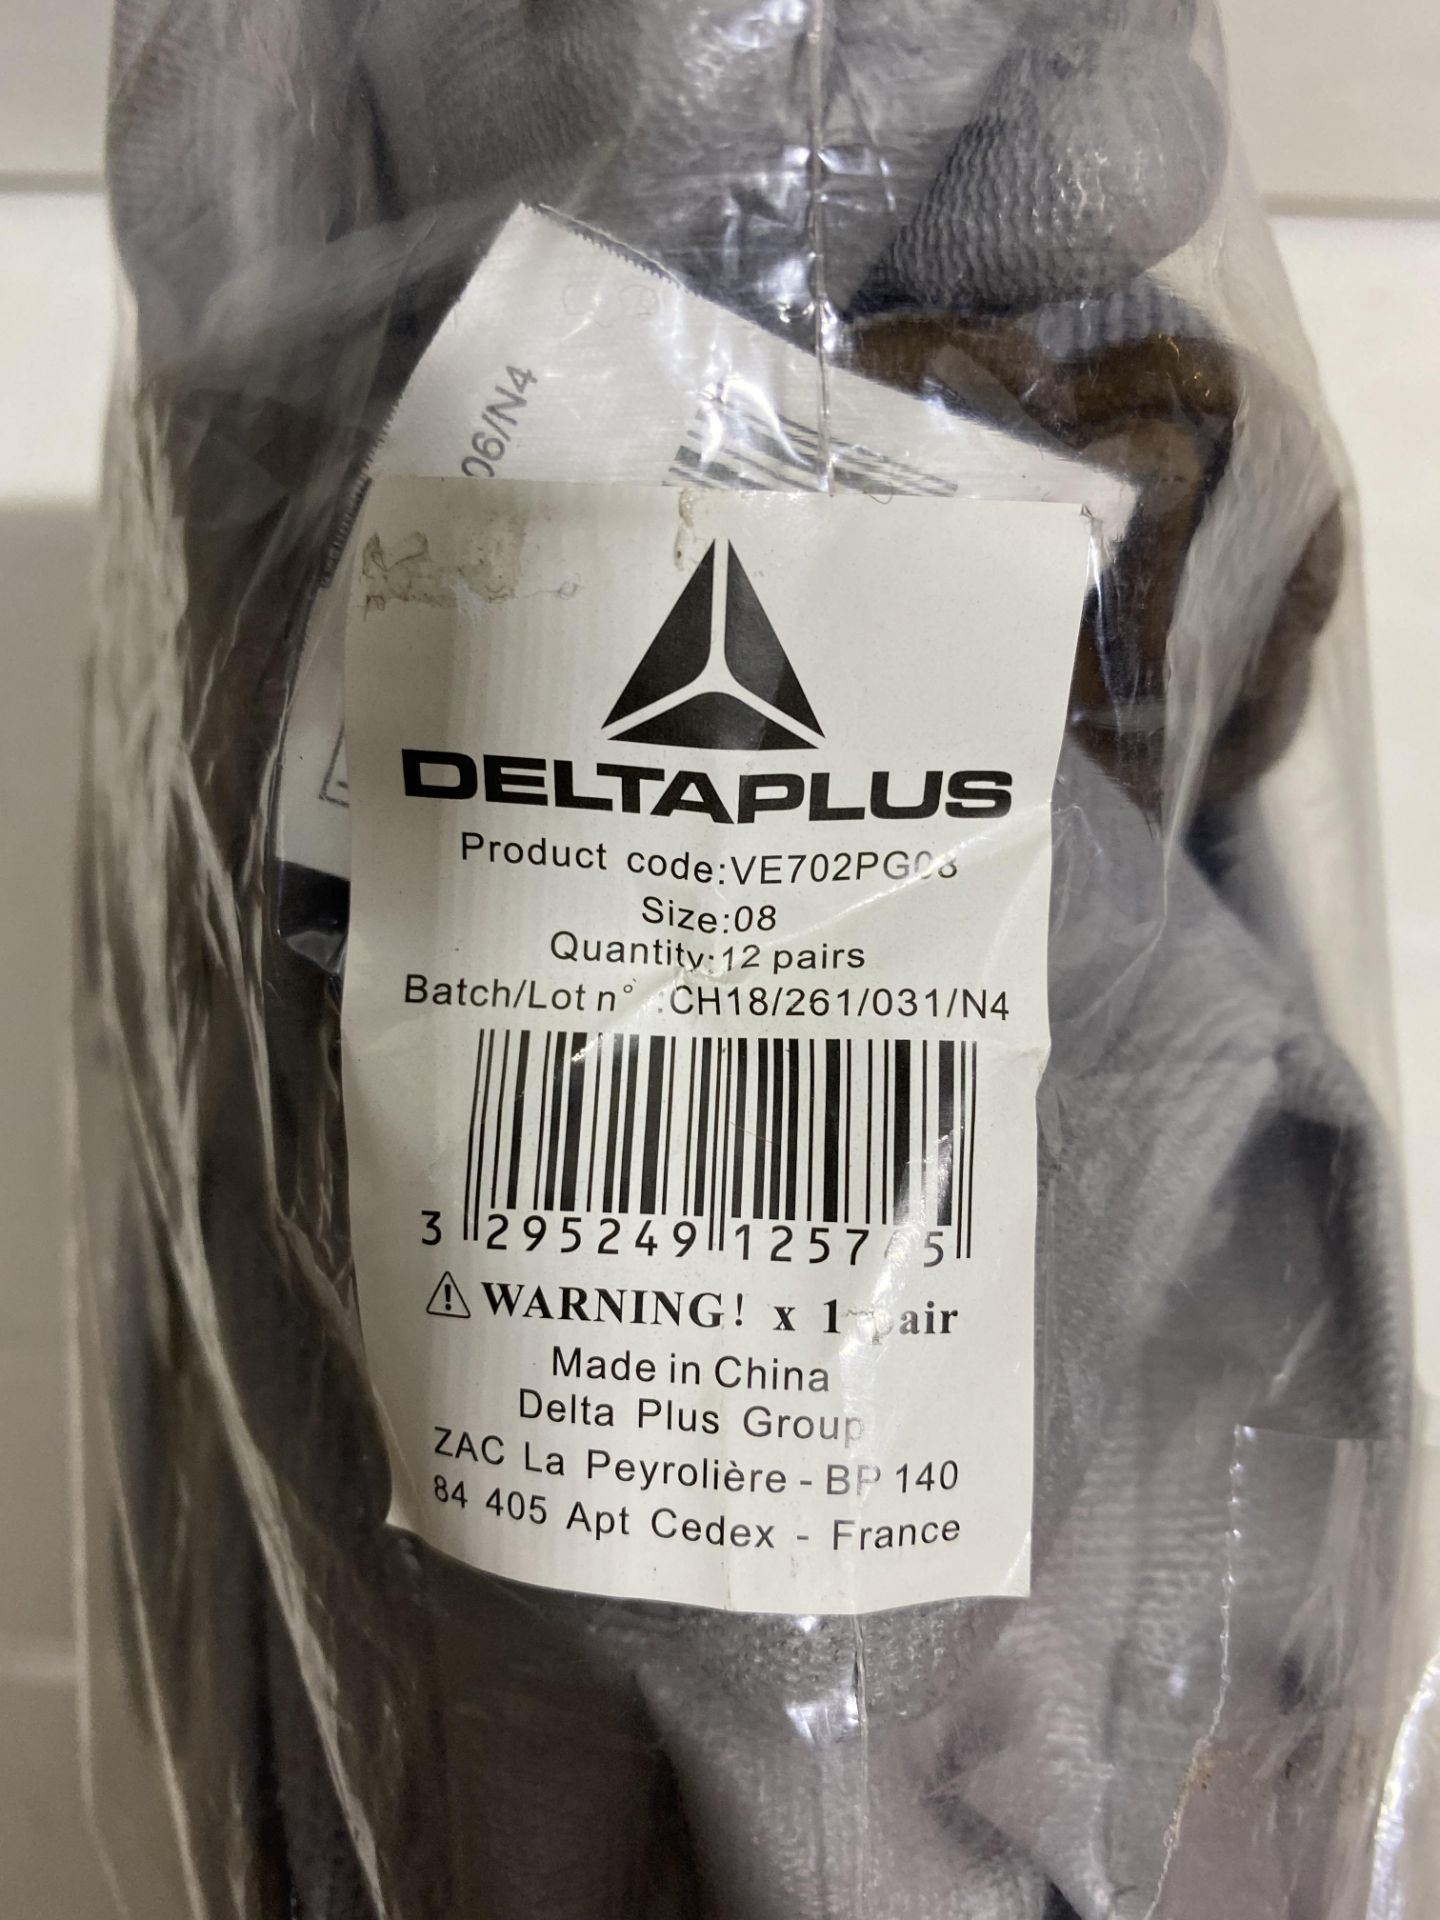 10 x Packs Of Deltaplus VE702PG08 Size 08 Grey Work Gloves ( 12 Pairs Per Pack ) - Image 2 of 2